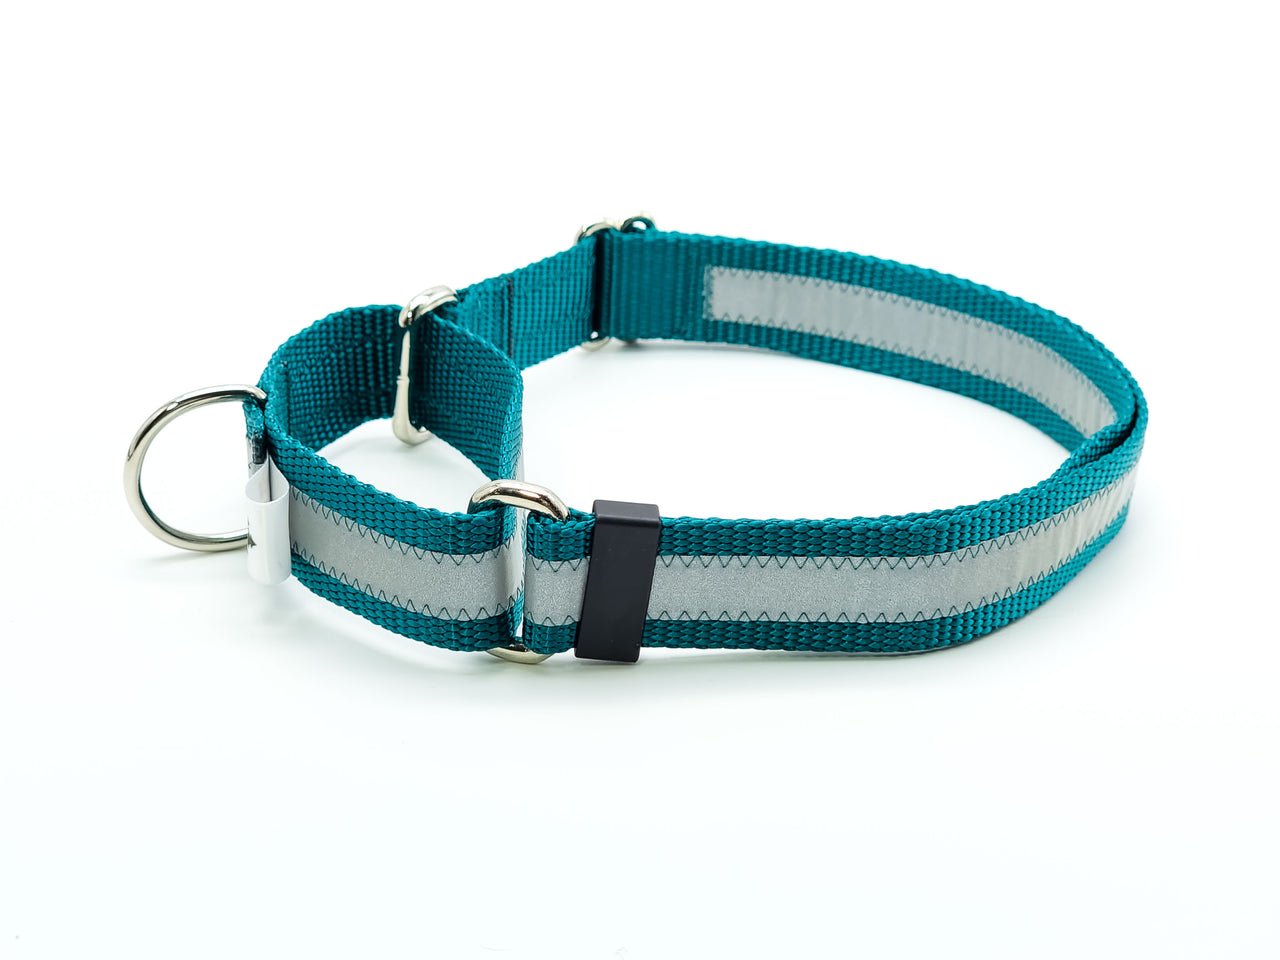 Teal Reflective Martingale - Small, Medium or XL